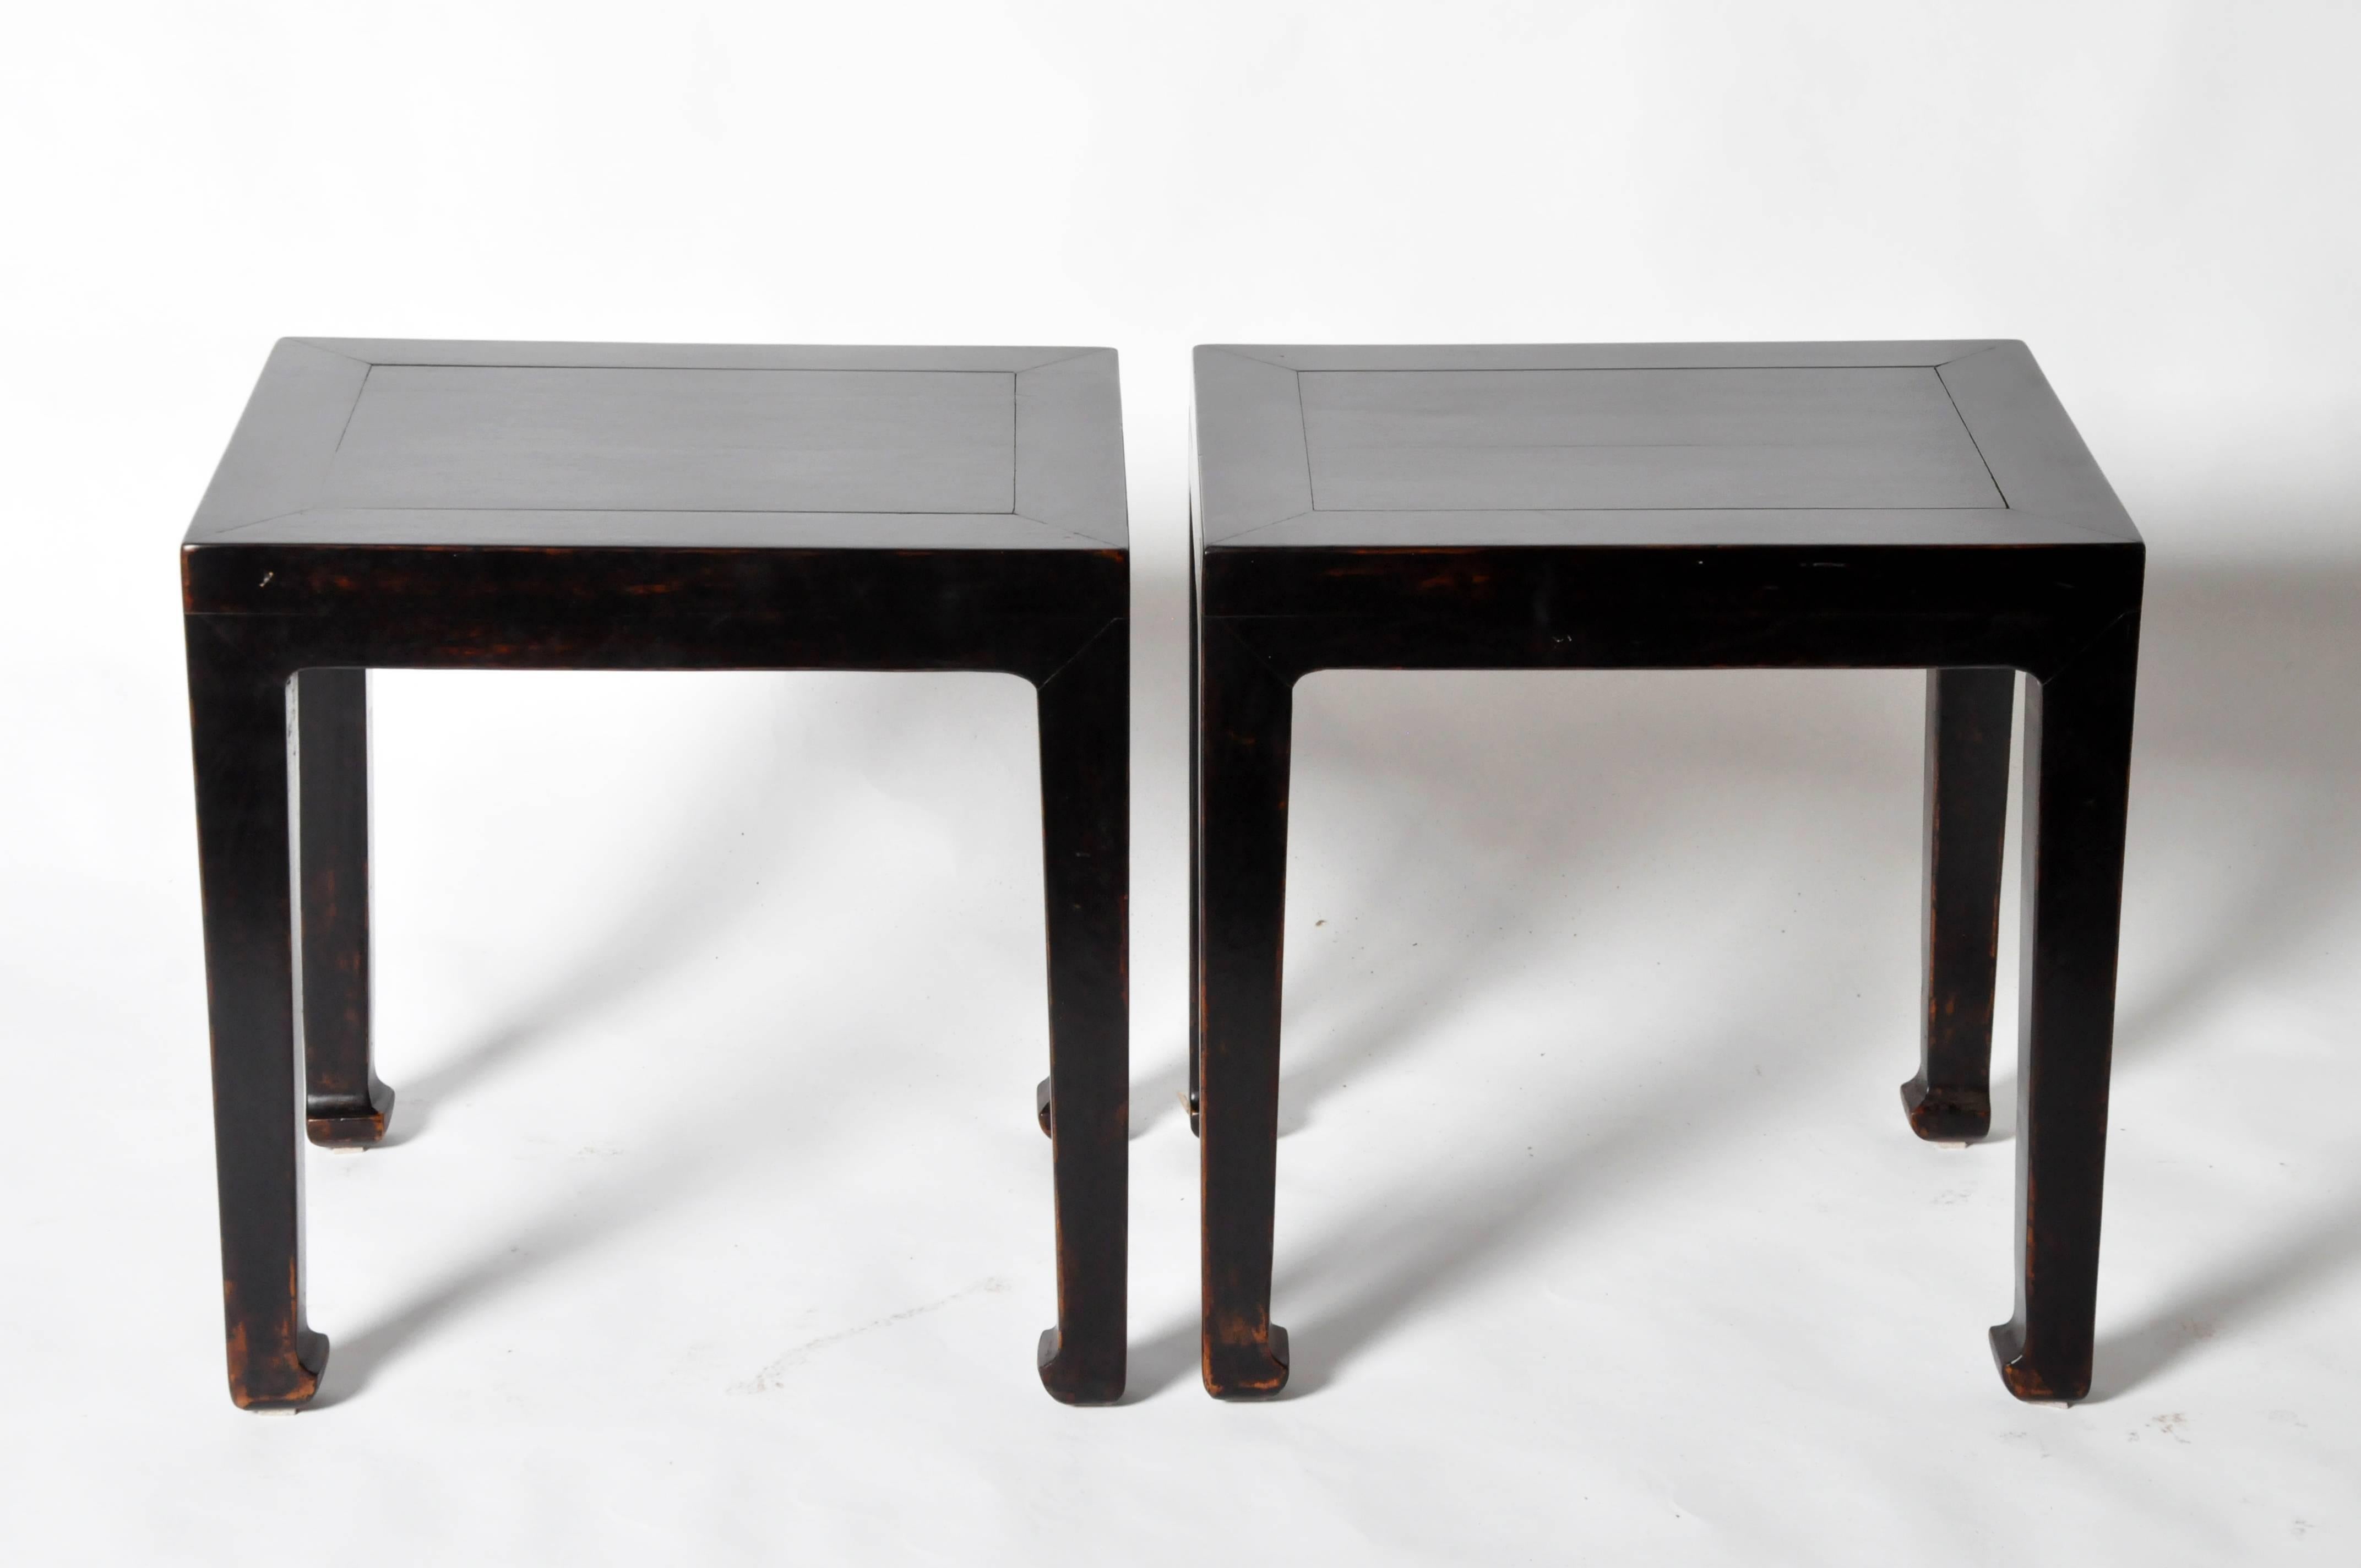 This pair of Chinese side tables are made from elmwood and has been fully restored. It features hoofed legs.